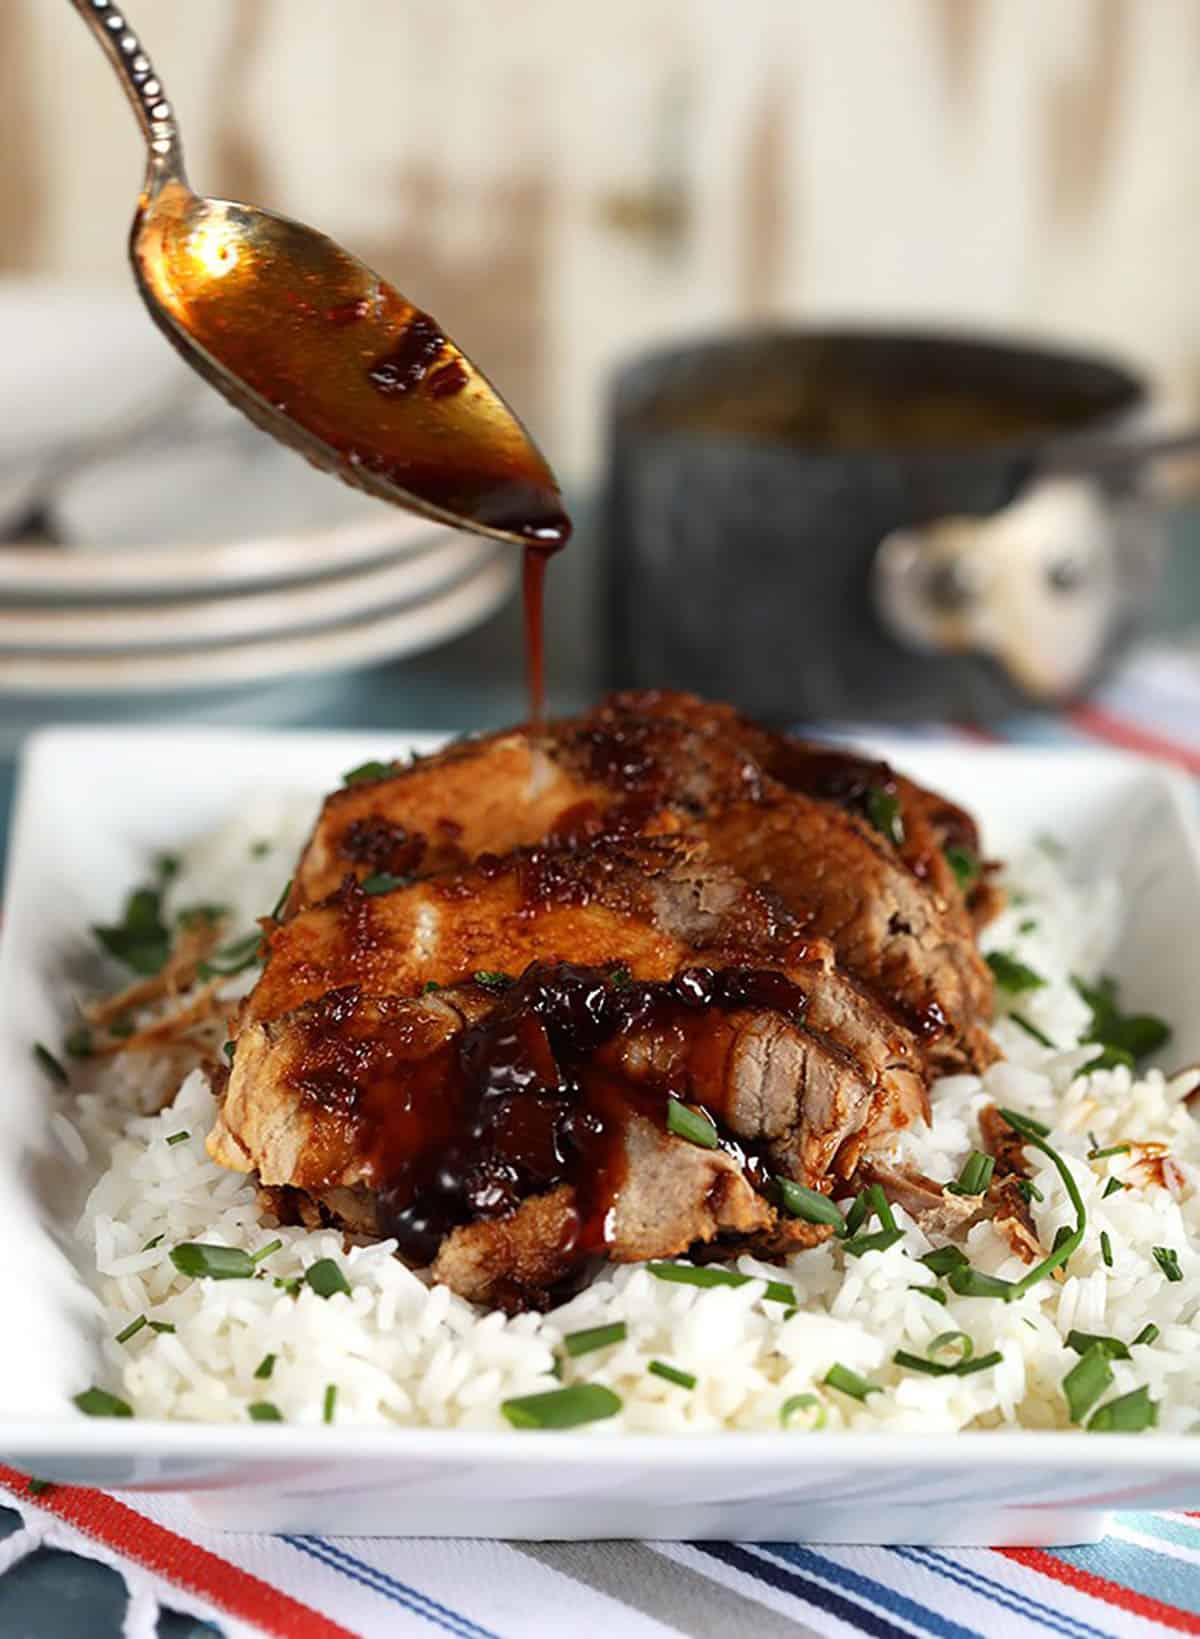 Honey garlic sauce being drizzled over Crock Pot Pork Loin Roast on a bed of white rice.